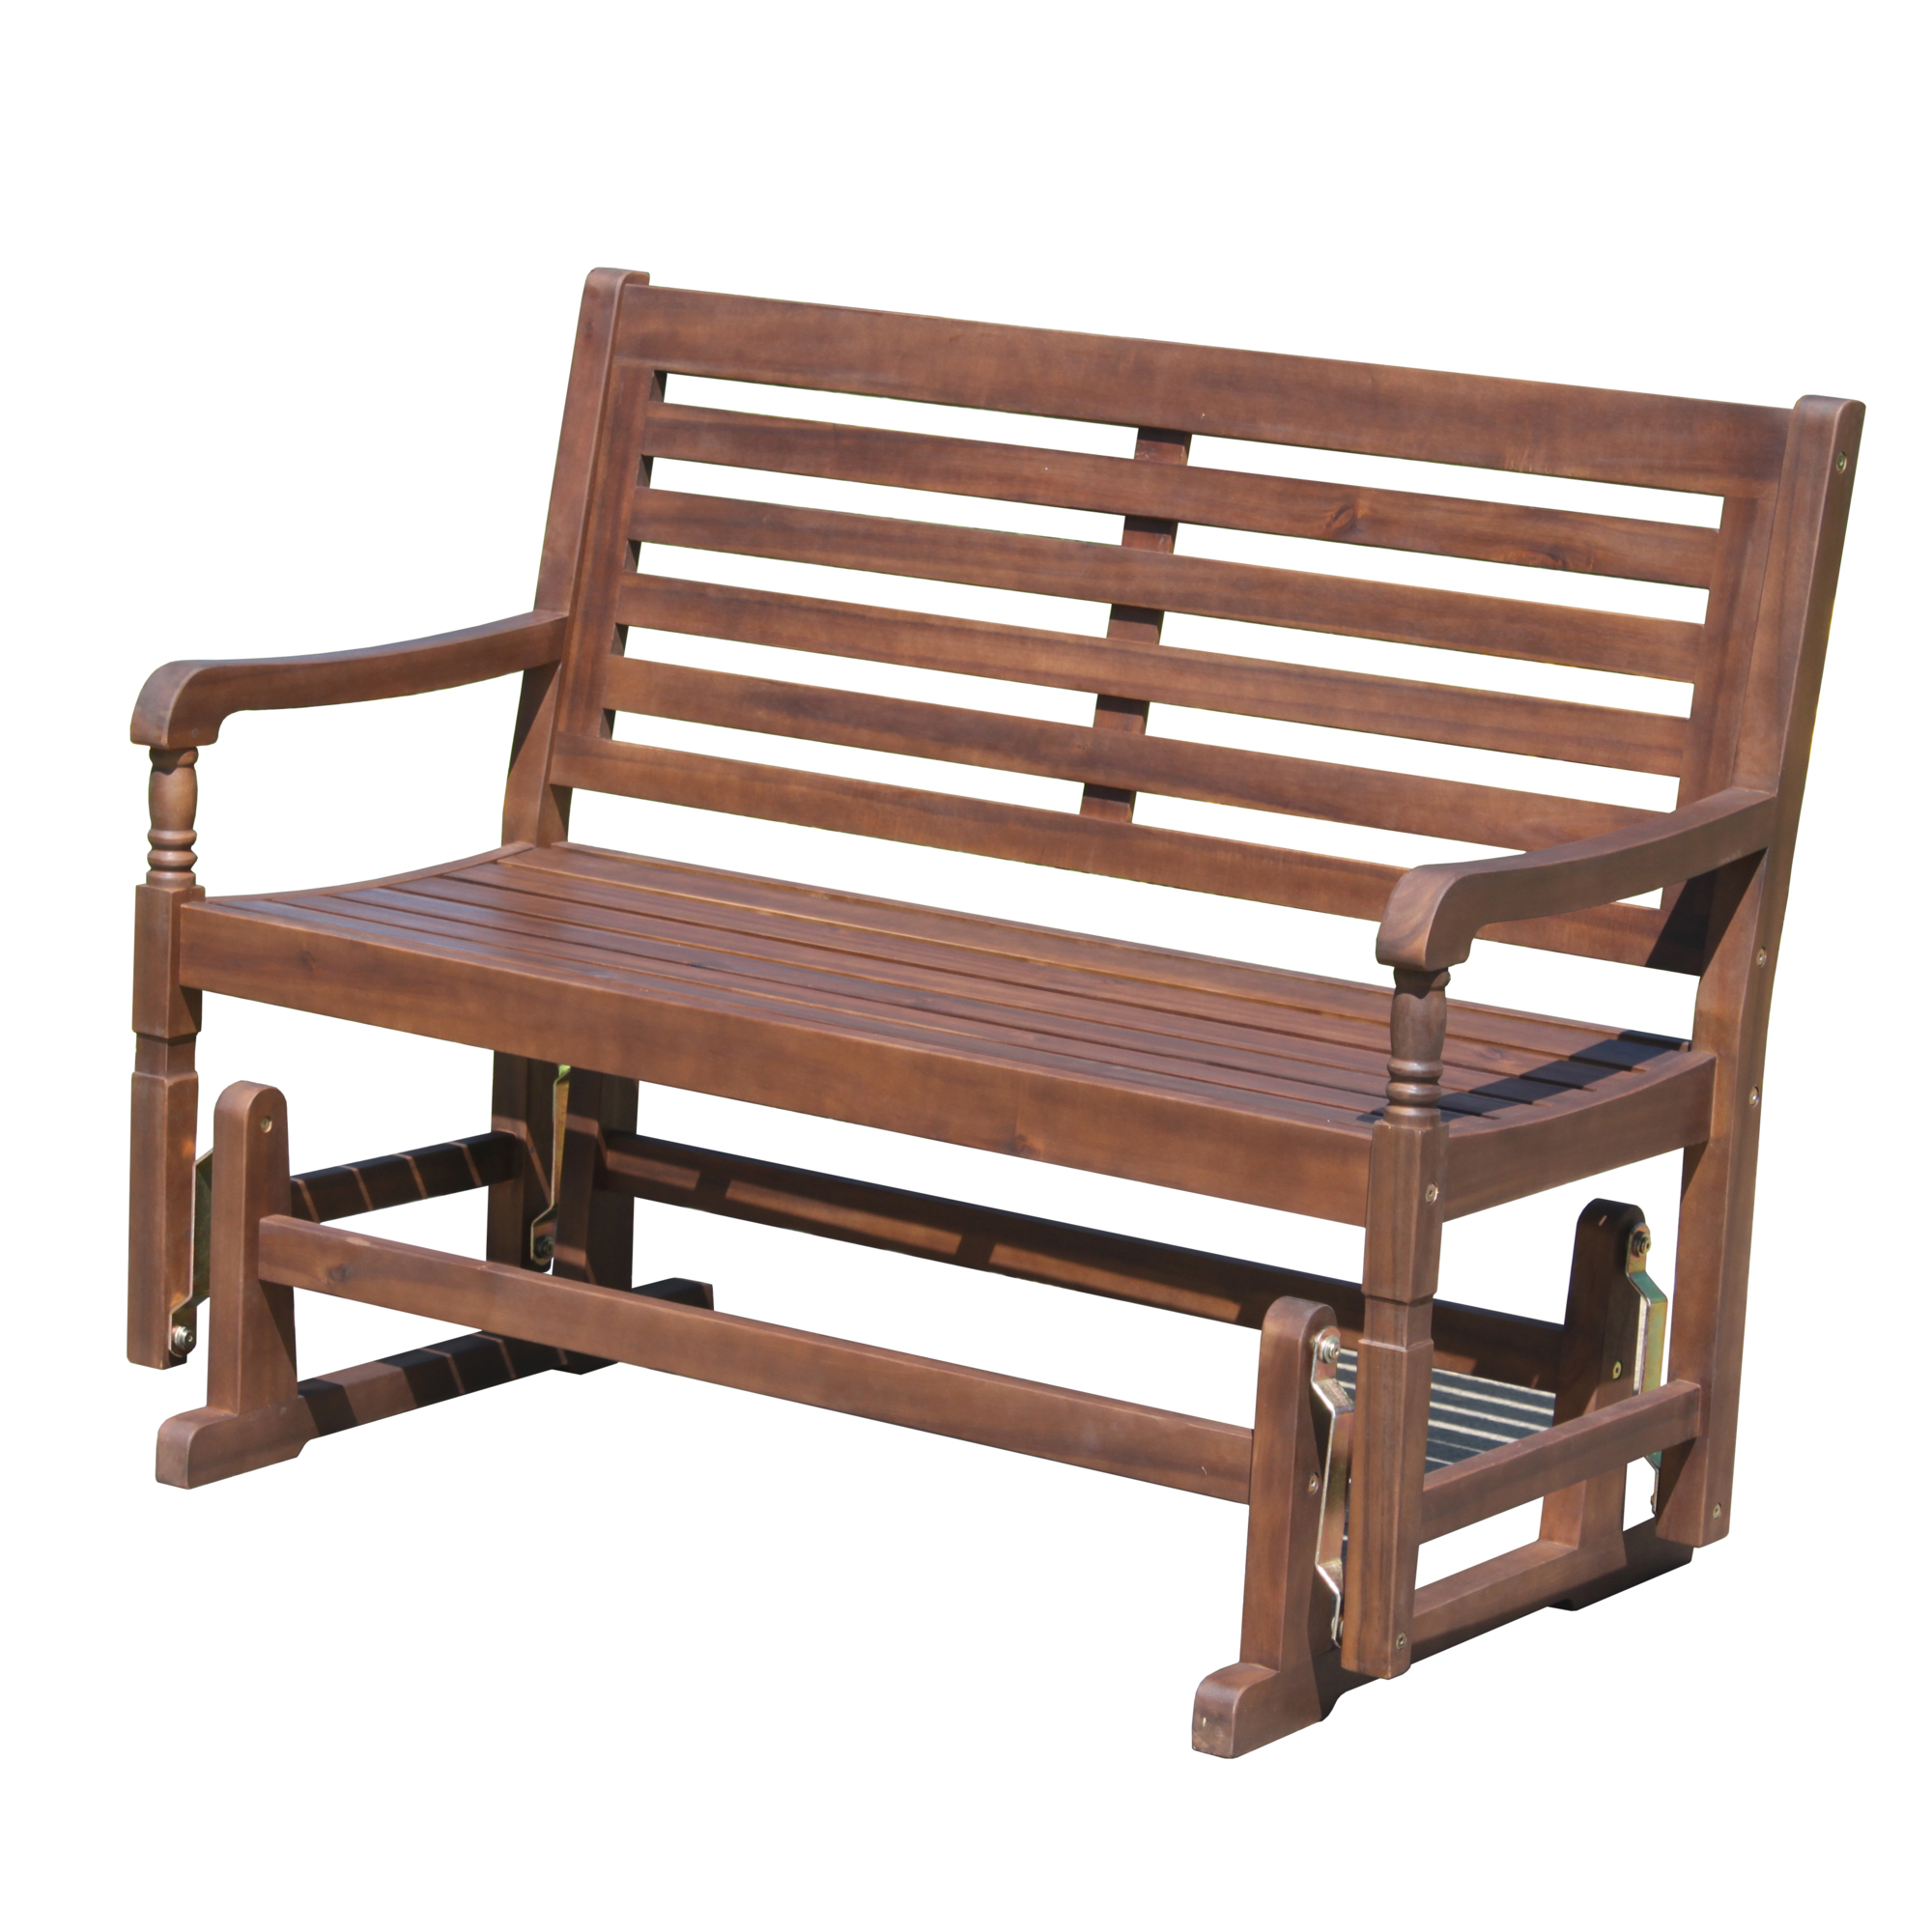 Merry Products, Nantucket Glider Bench, Primary Color Brown, Material Wood, Width 46.46 in, Model GLD0010114910